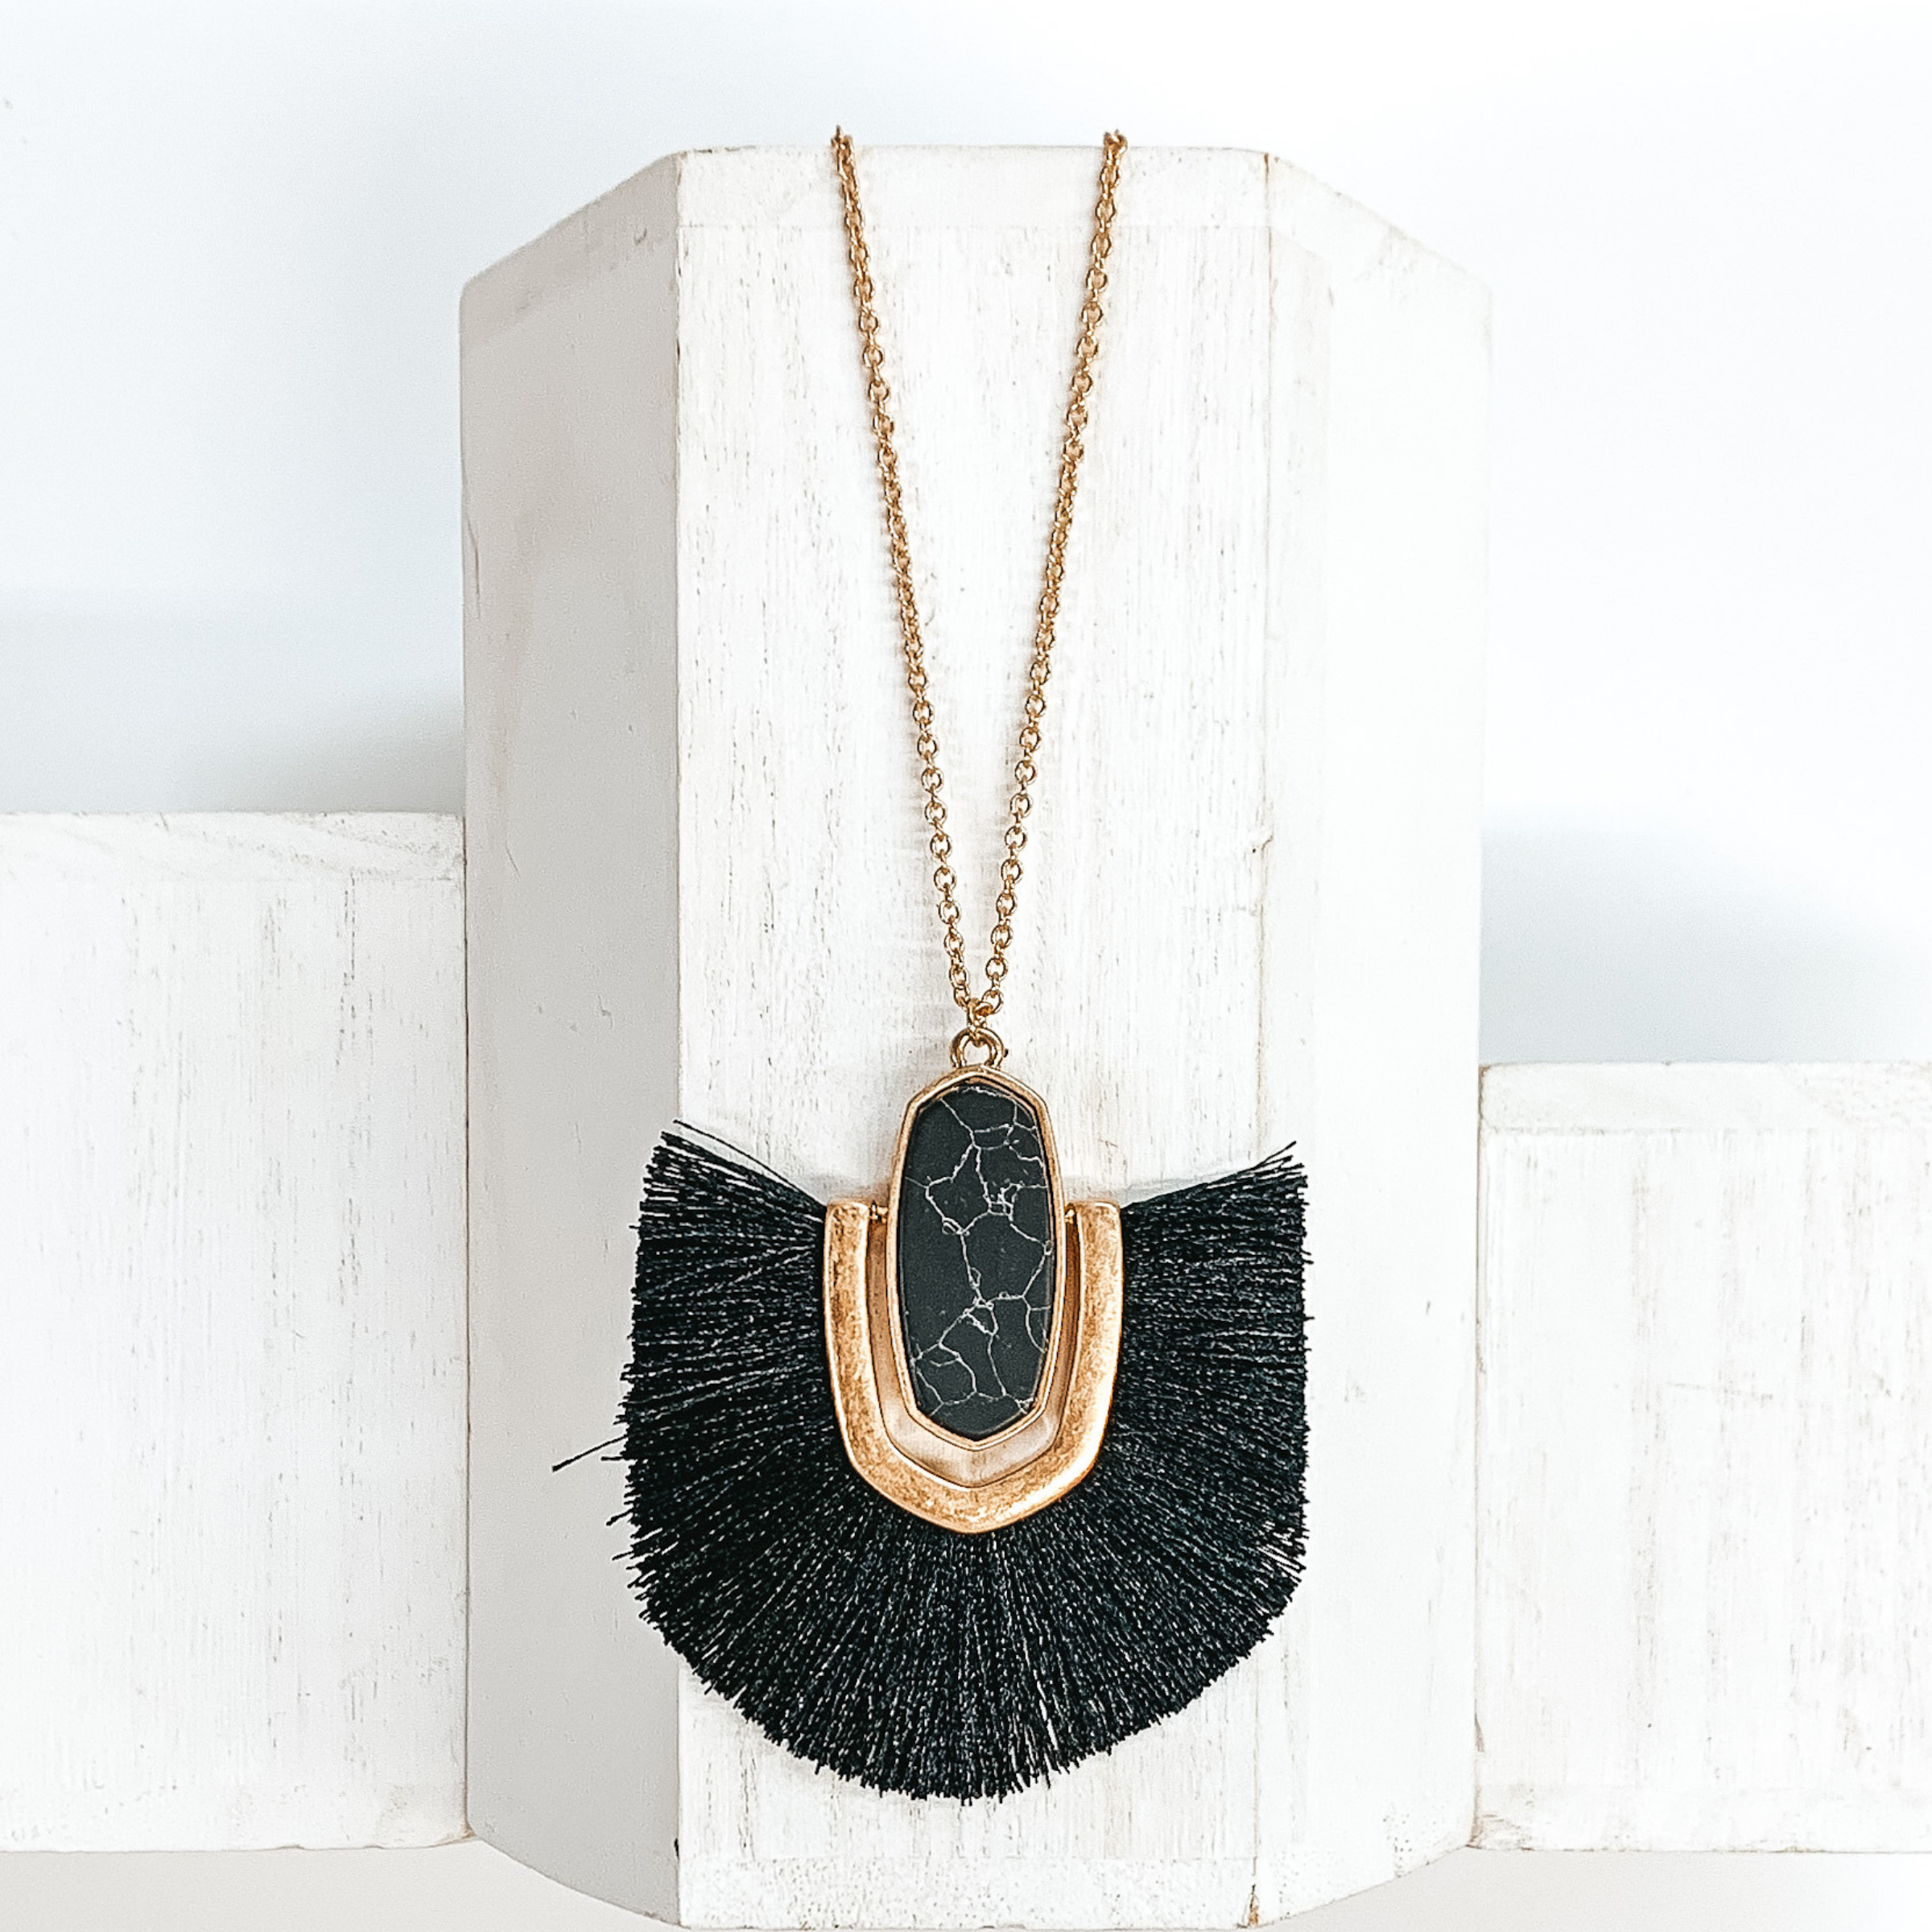 Thin, gold chained necklace with an oval shaped black stone pendant that has a half oval gold accent connected at the sides that inlcudes black fringe. This necklace is pictured on a white block on a white background.